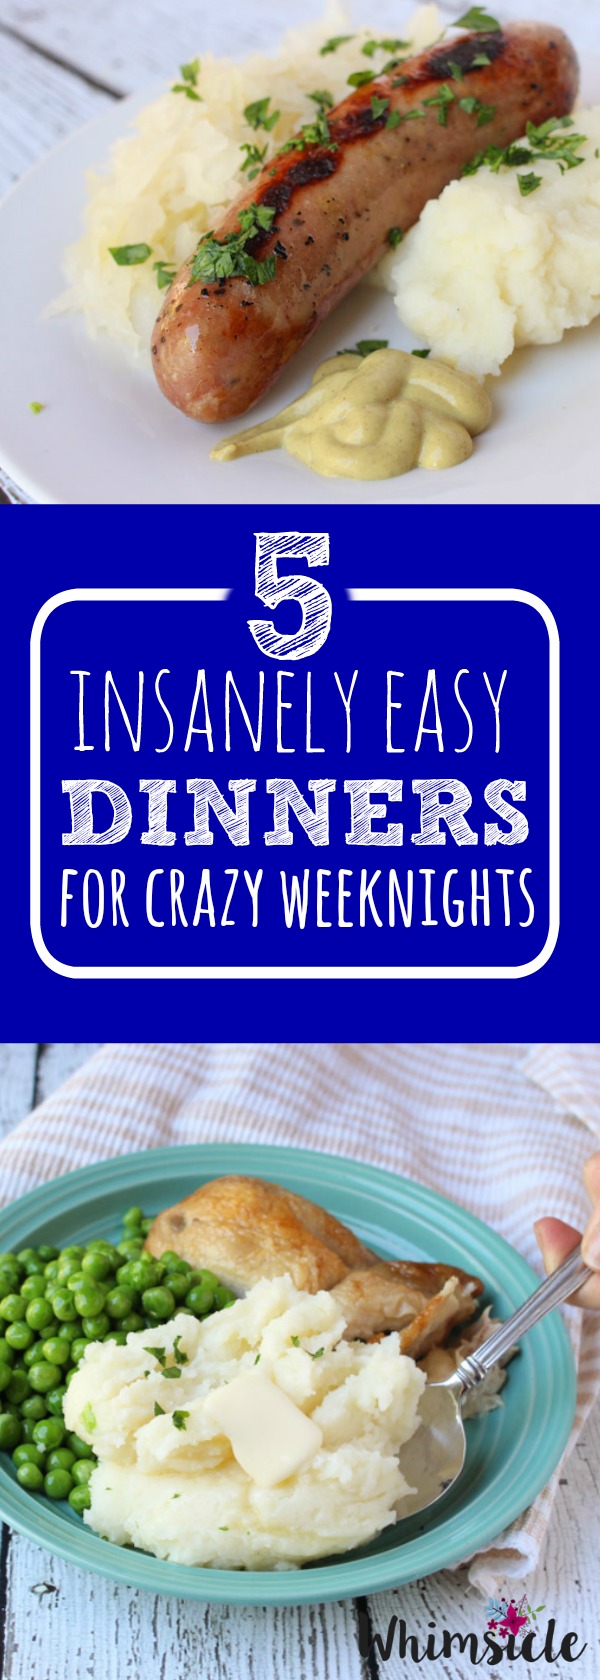 5 easy dinner recipes for simple weeknight meals. These are also great kids meals for pleasing those picky eaters.